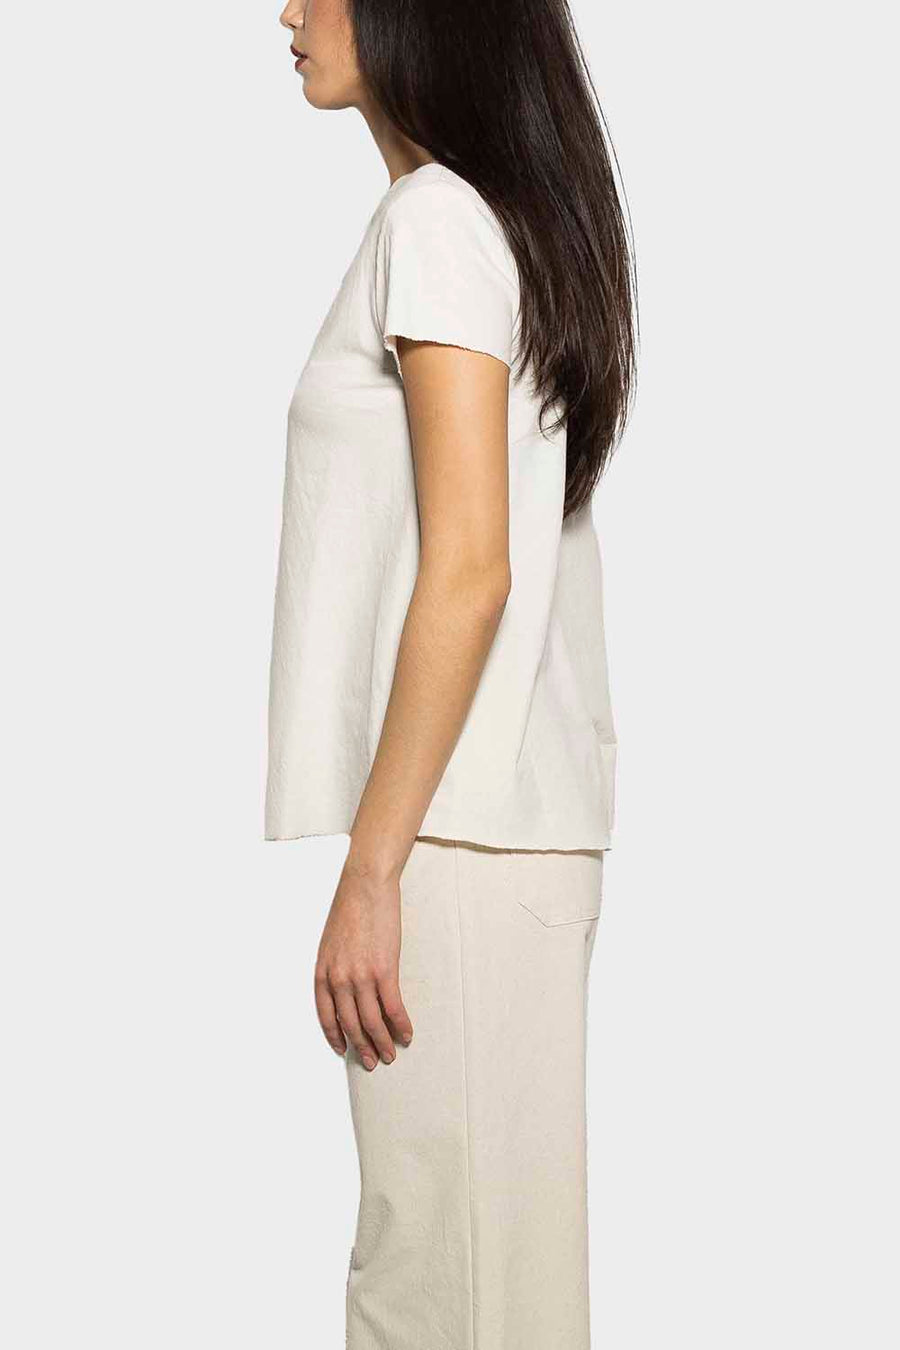 T-shirt Isabella Clementini in jersey beige i1281